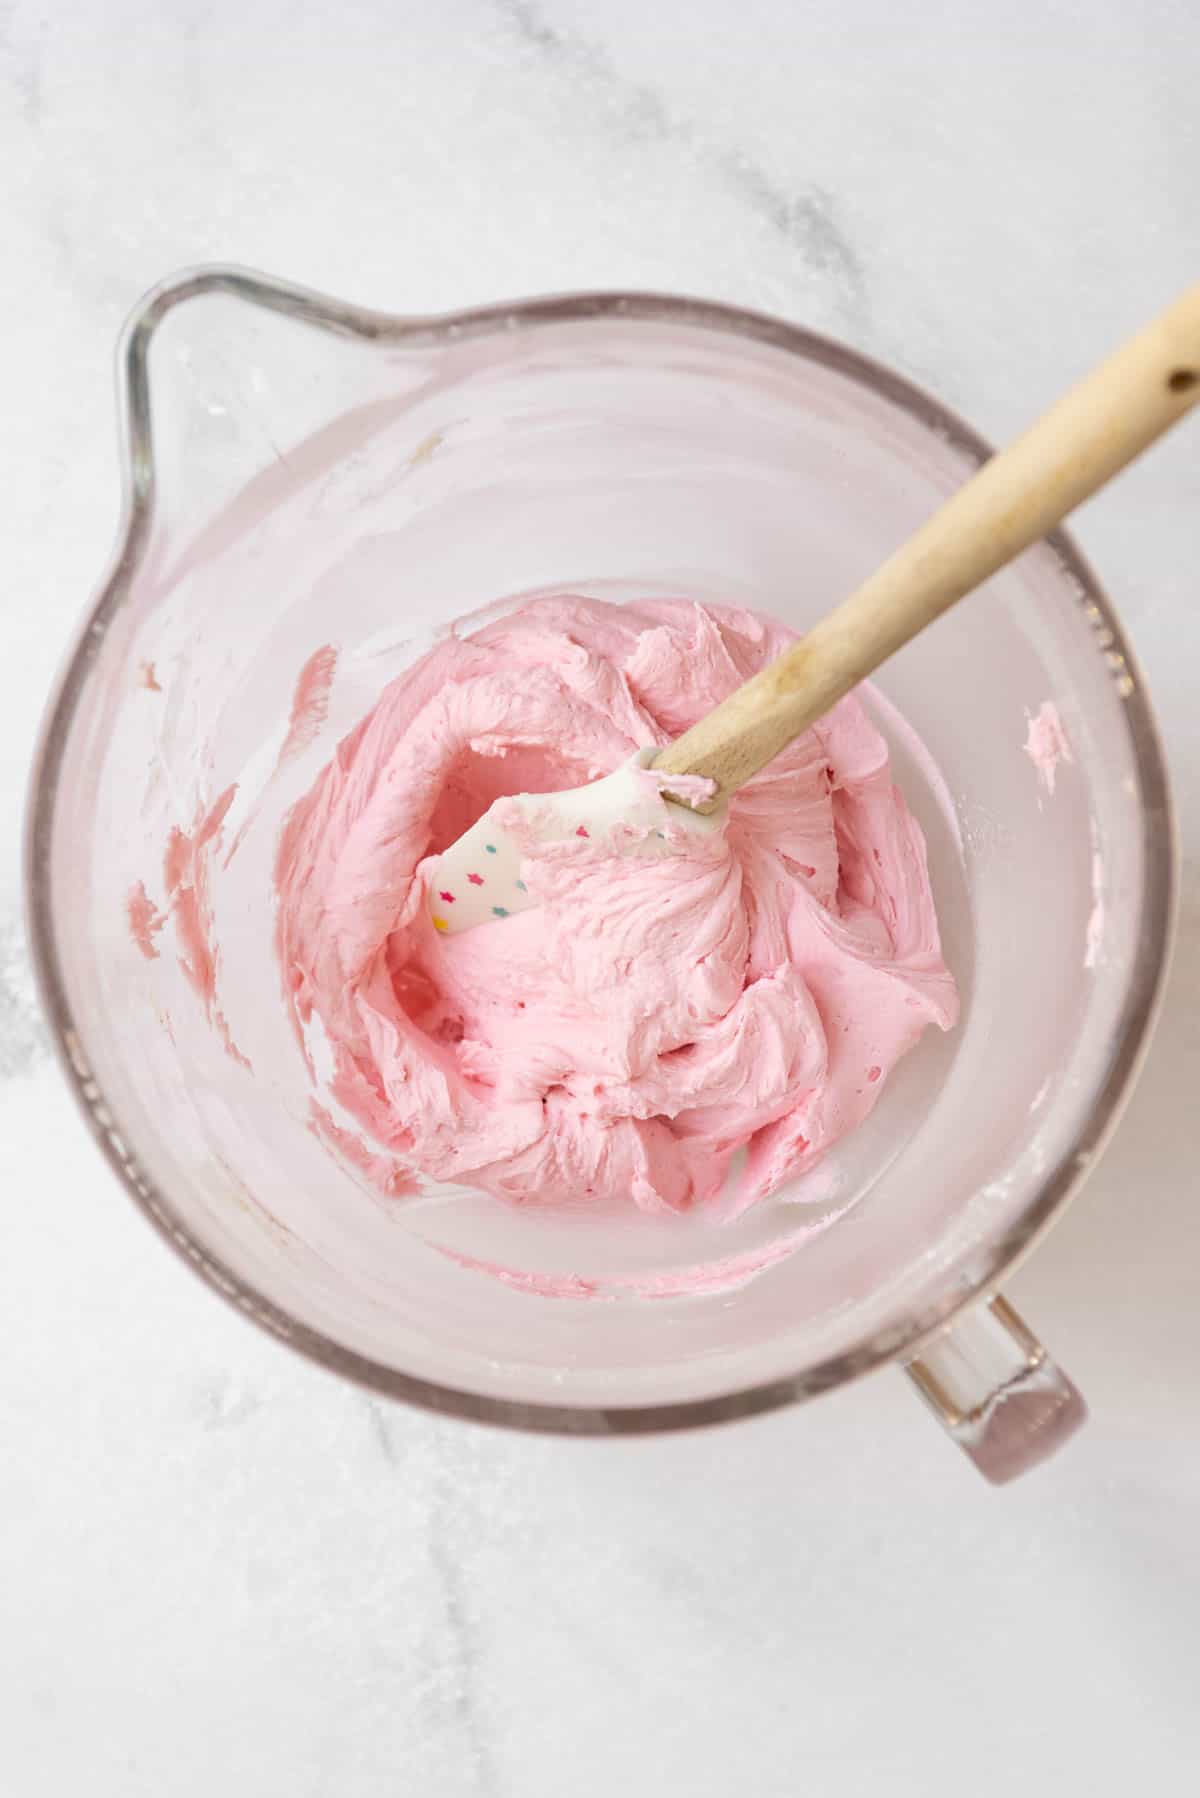 A spatula in a lass glass mixing bowl filled with pink frosting.